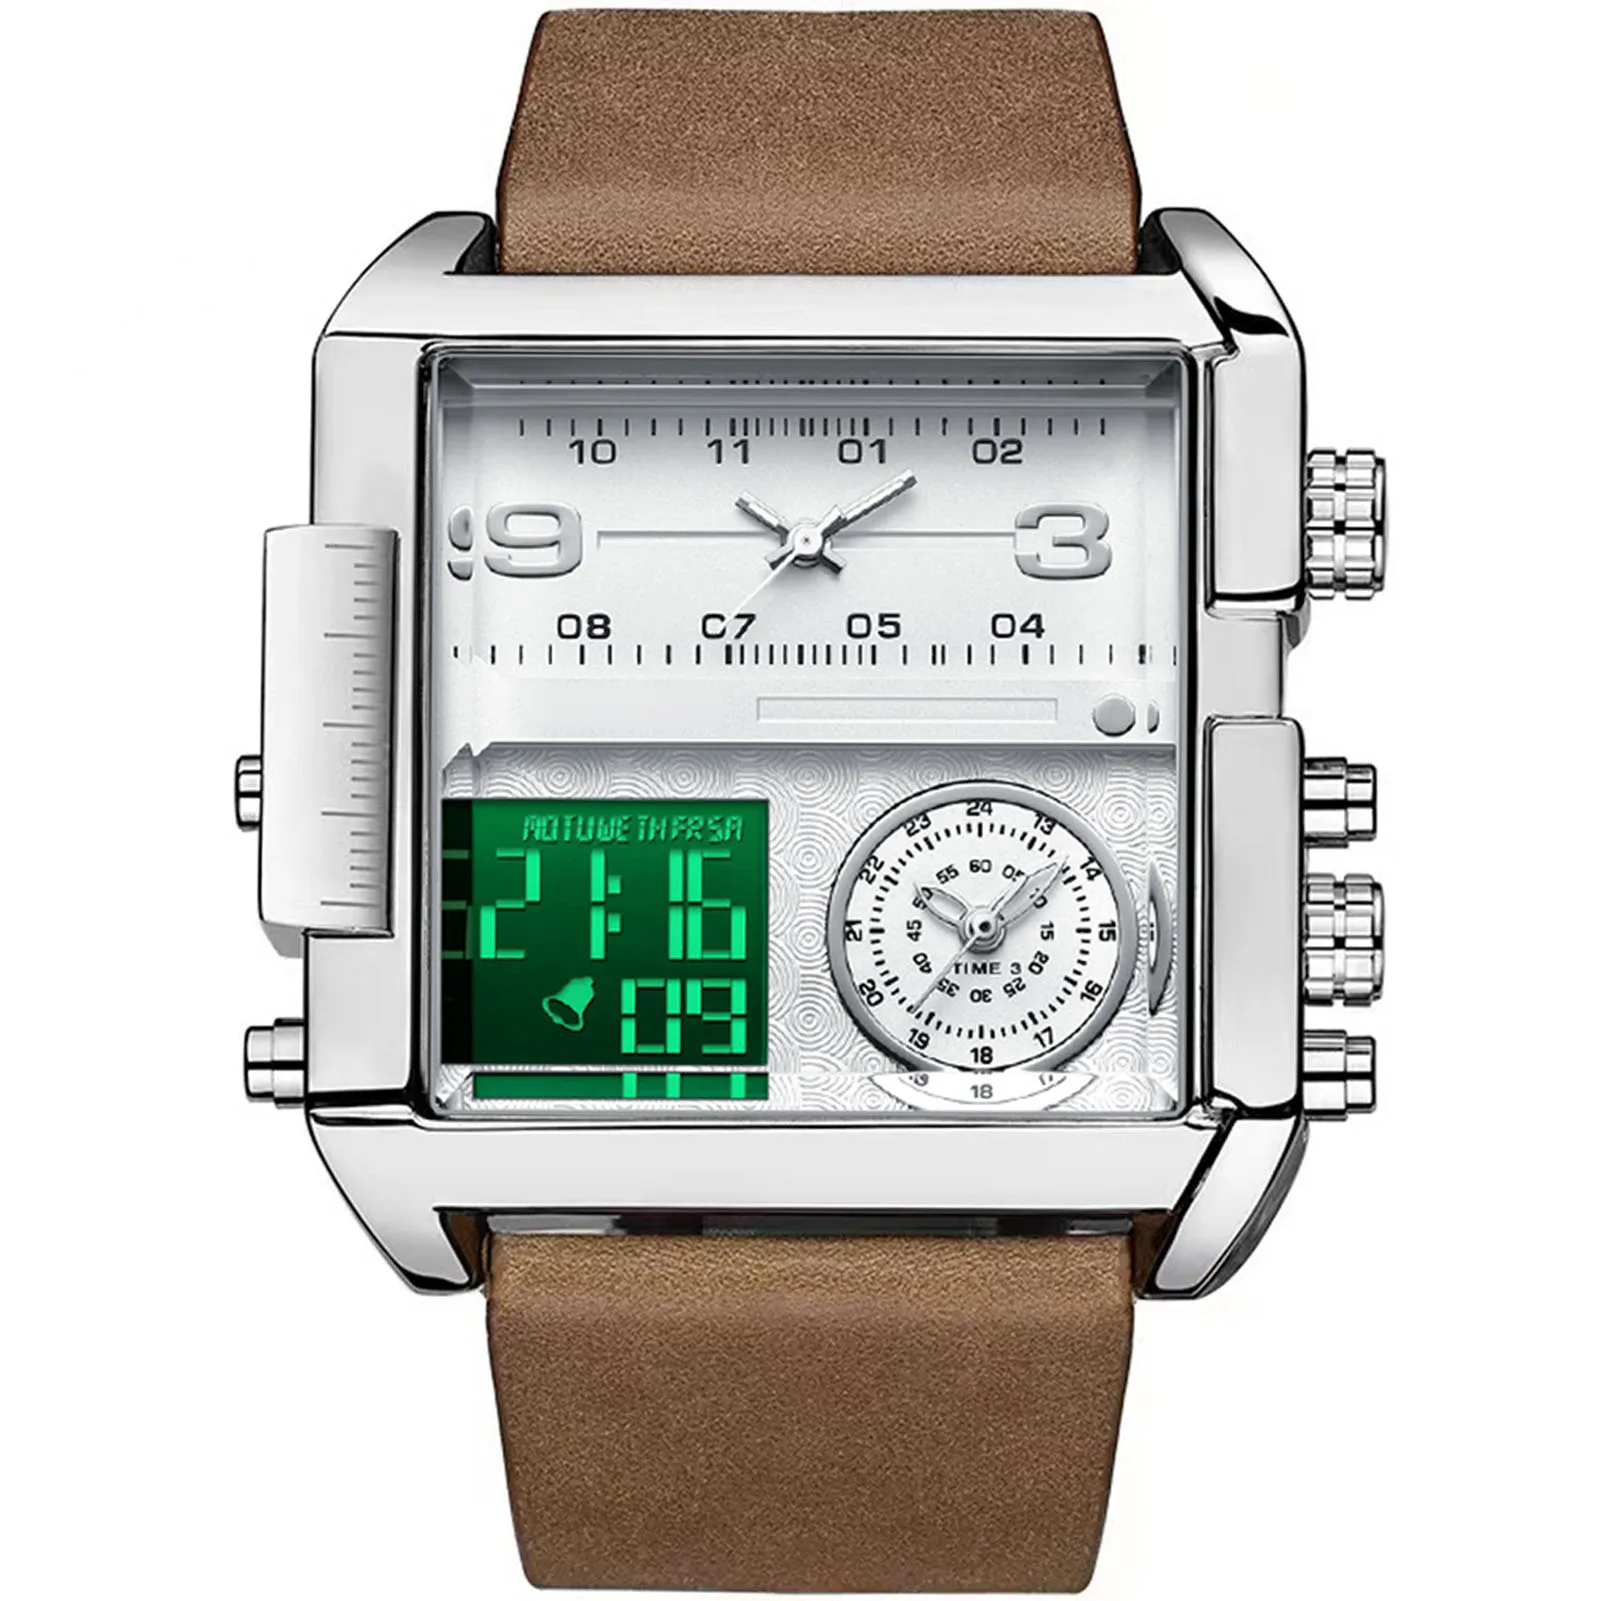 

Men Square Dial Digital Watch 24H Calendar Display Wrist Watch Gift for Birthday Father's Day